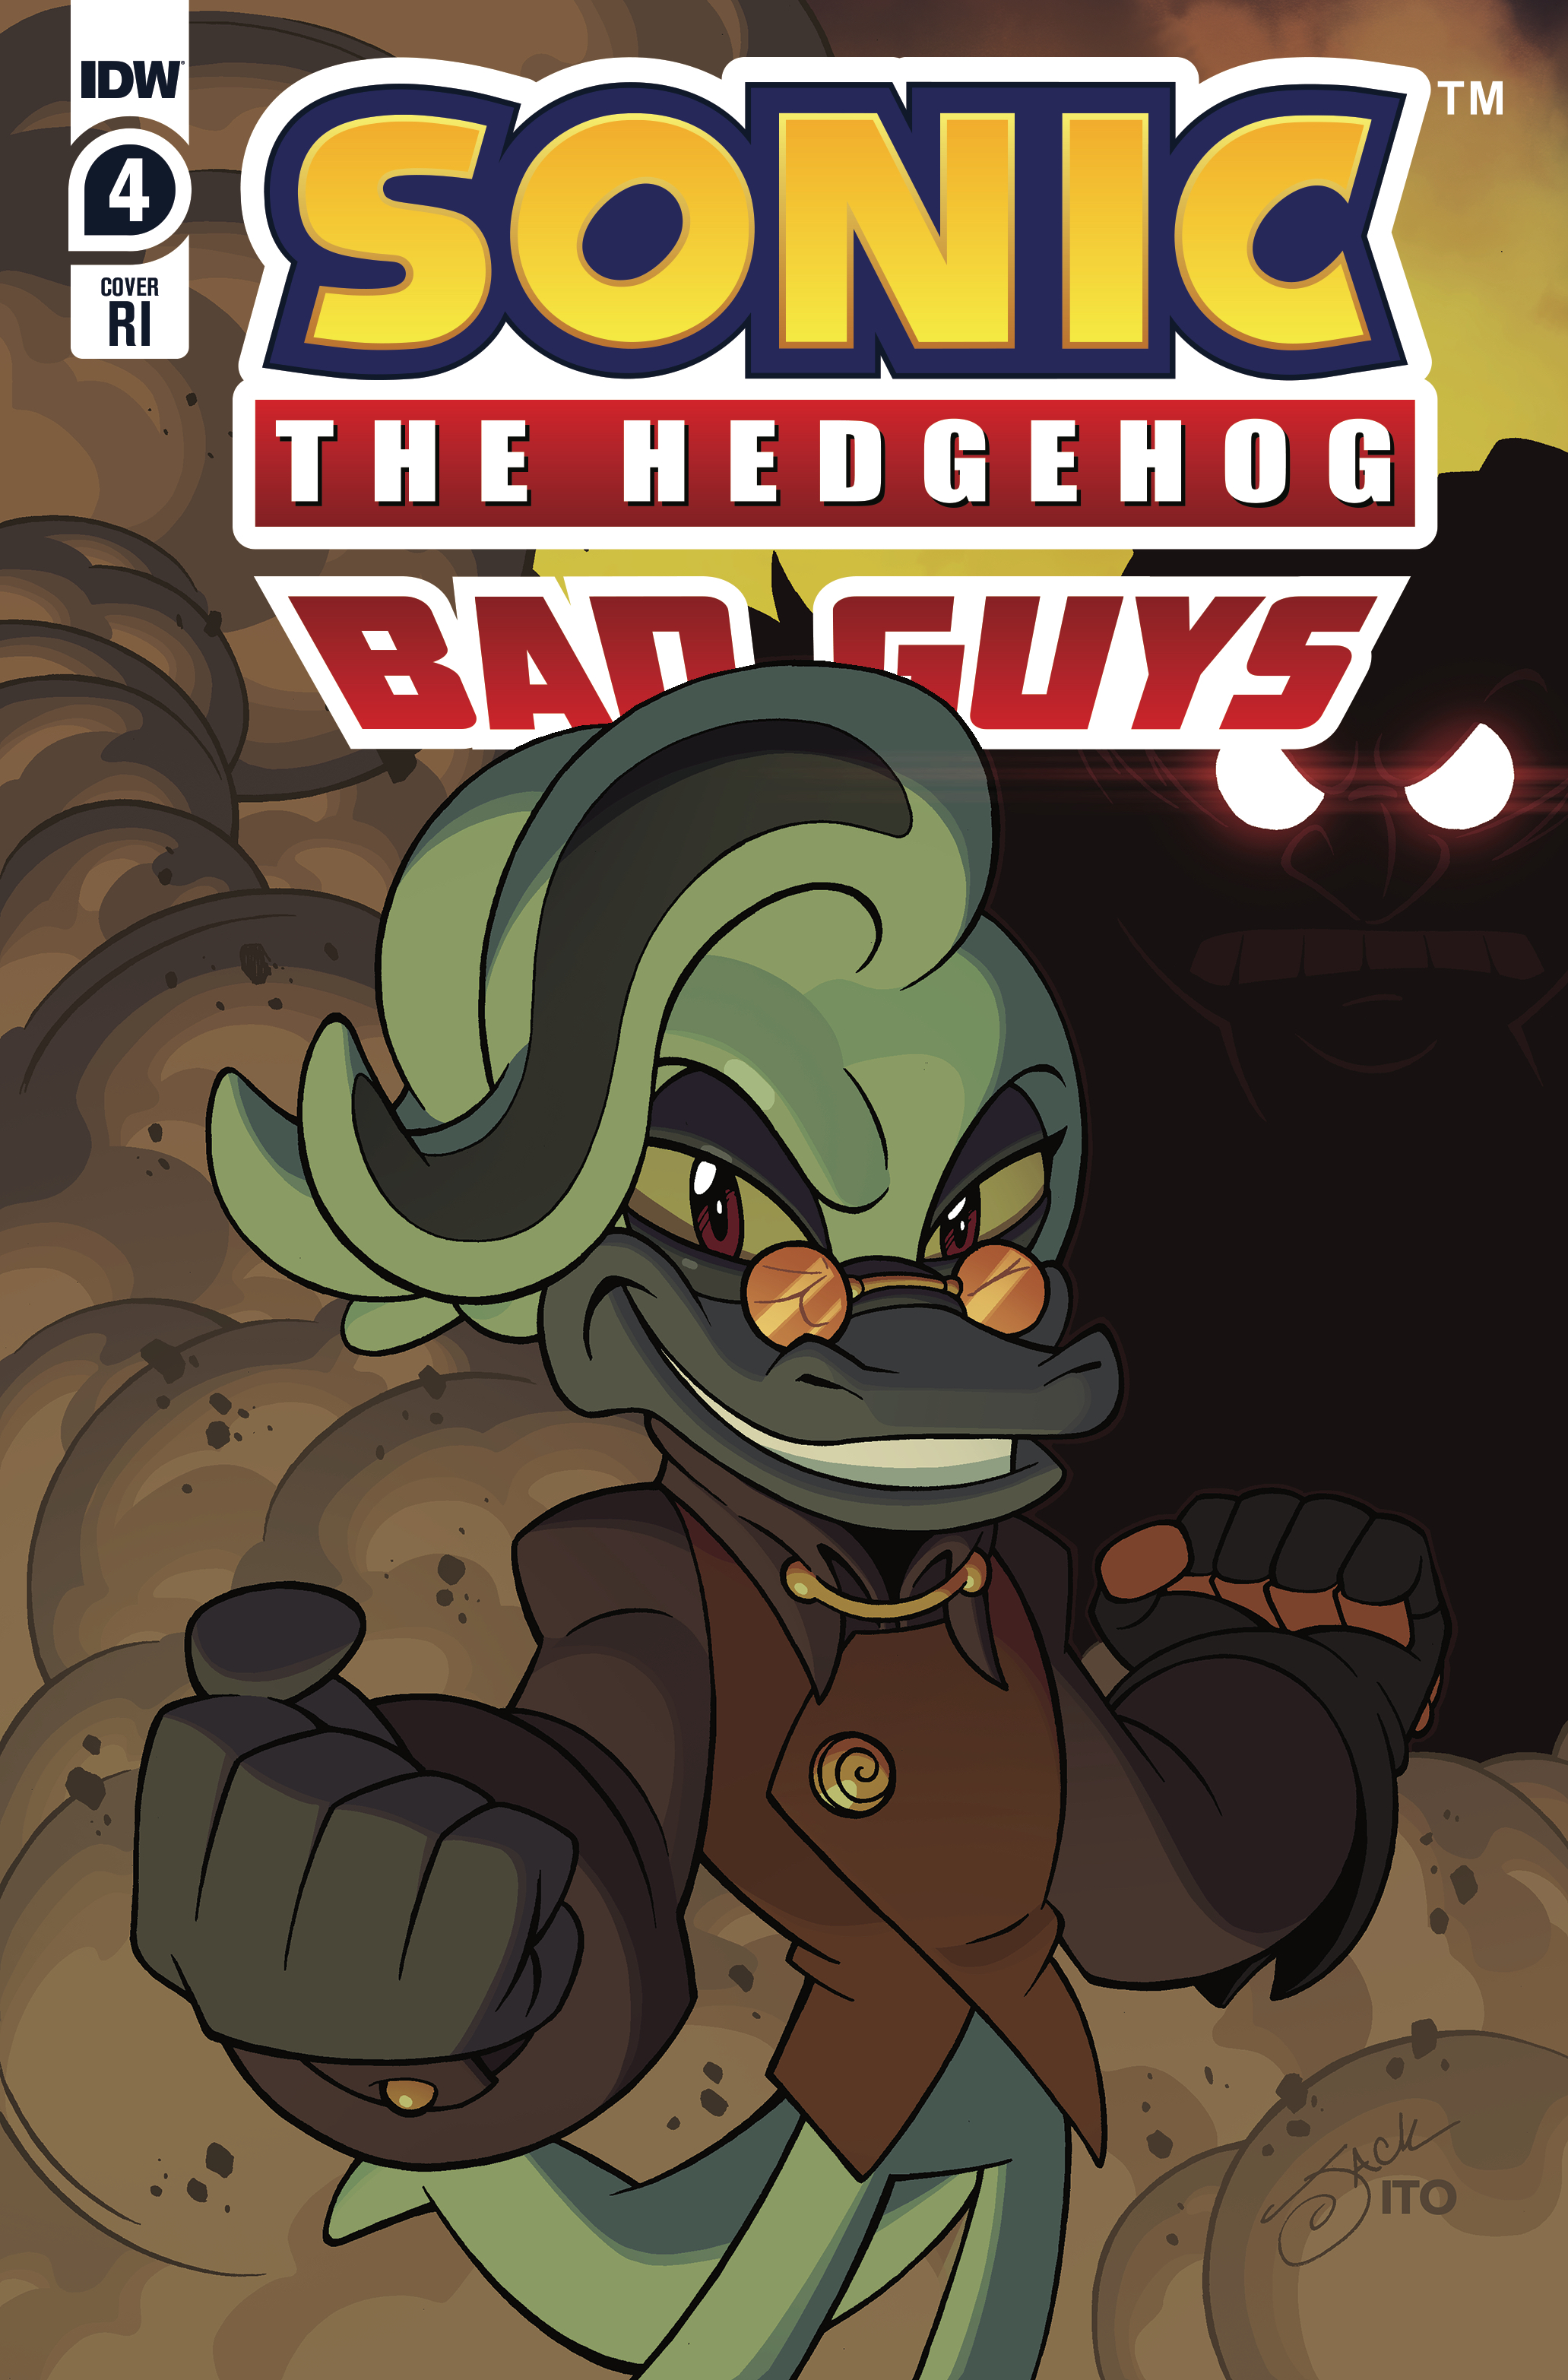 Sonic the Hedgehog Bad Guys #4 1 for 10 Incentive Lawrence (Of 4)